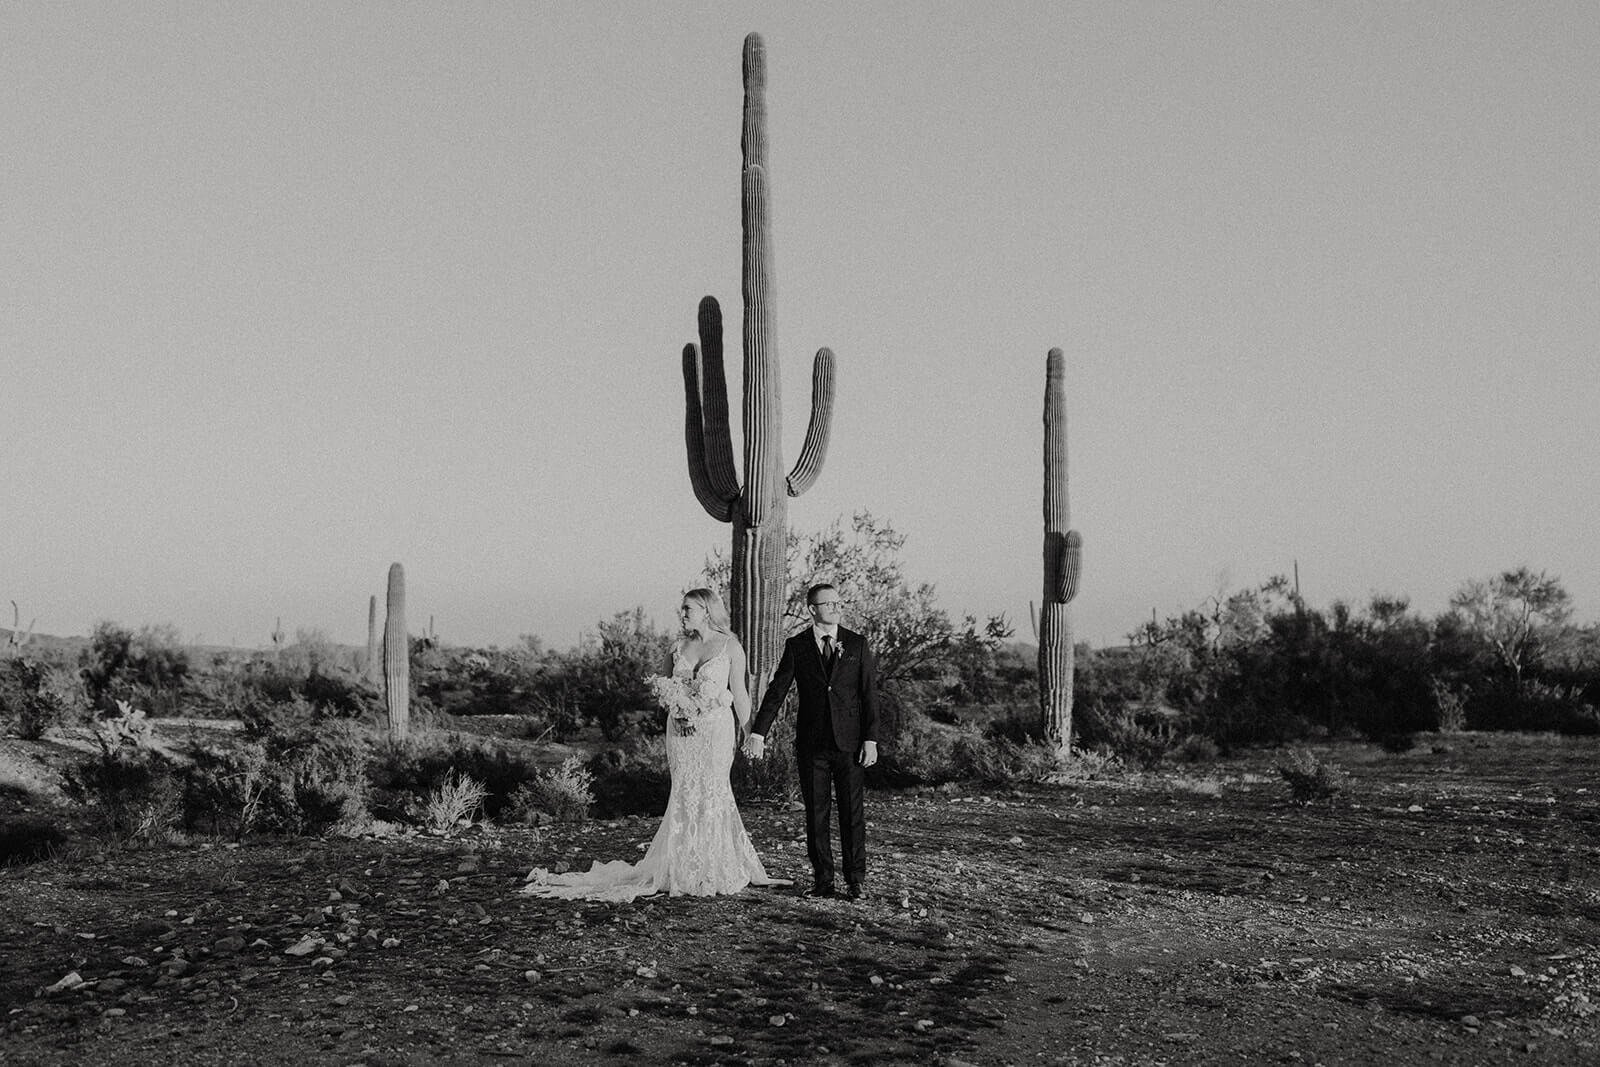 Black and white photo of bride and groom in front of a large saguaro cactus in the desert